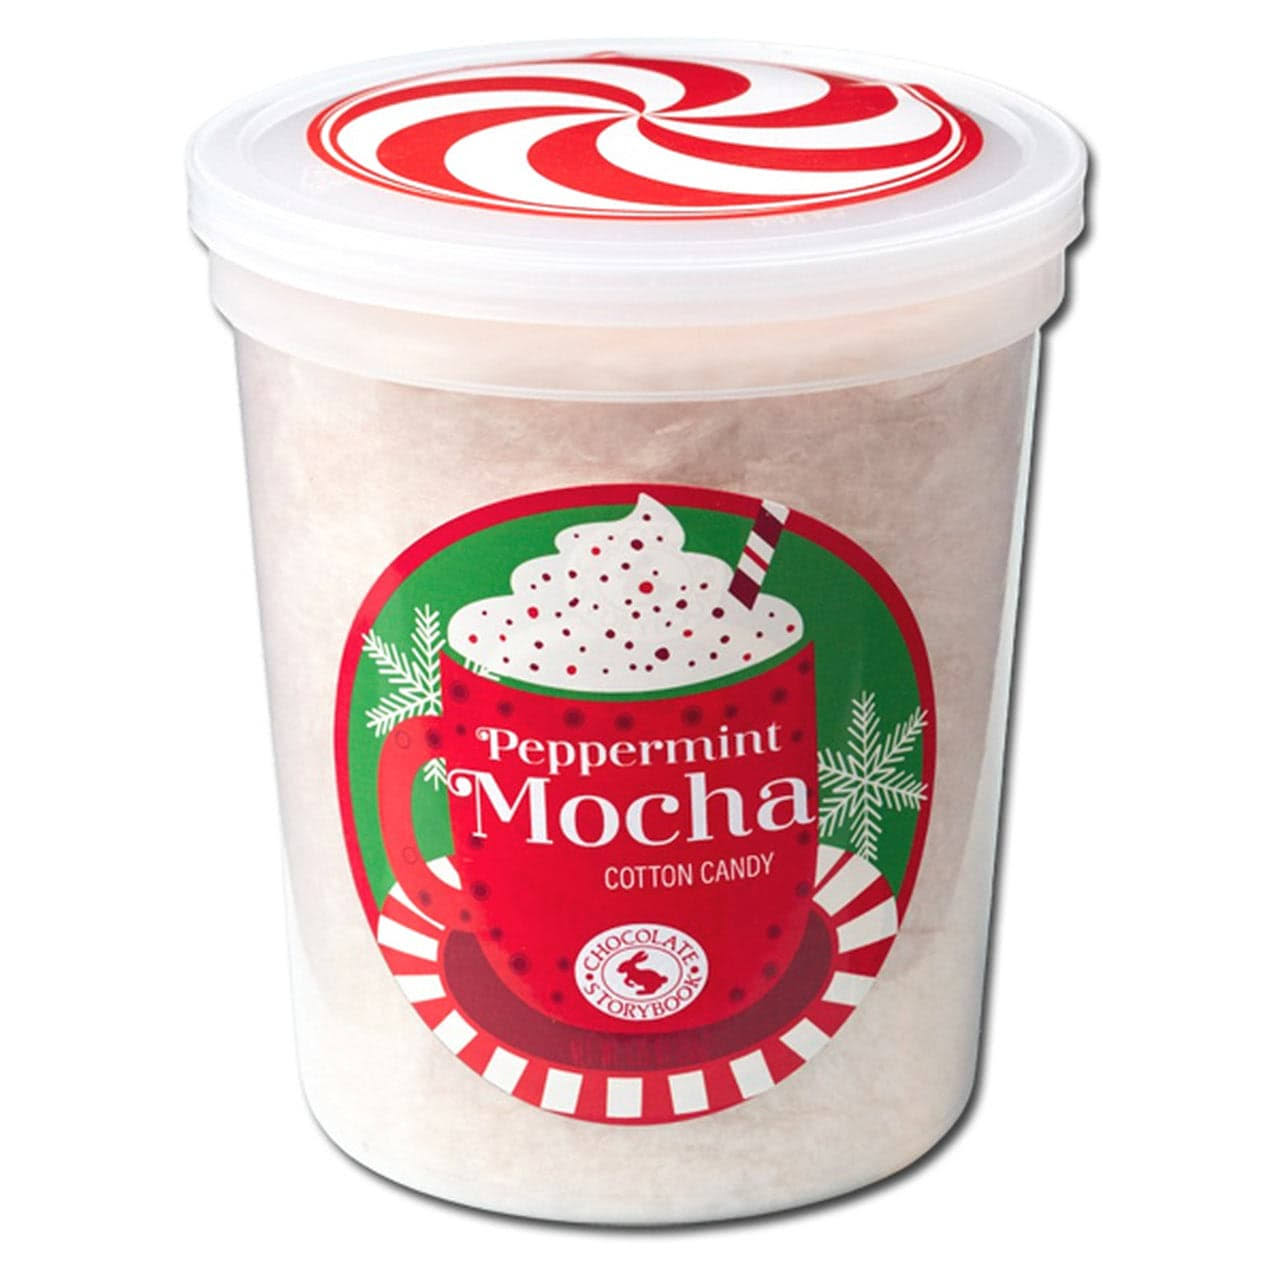 Peppermint Mocha Cotton Candy Expired 11/2021